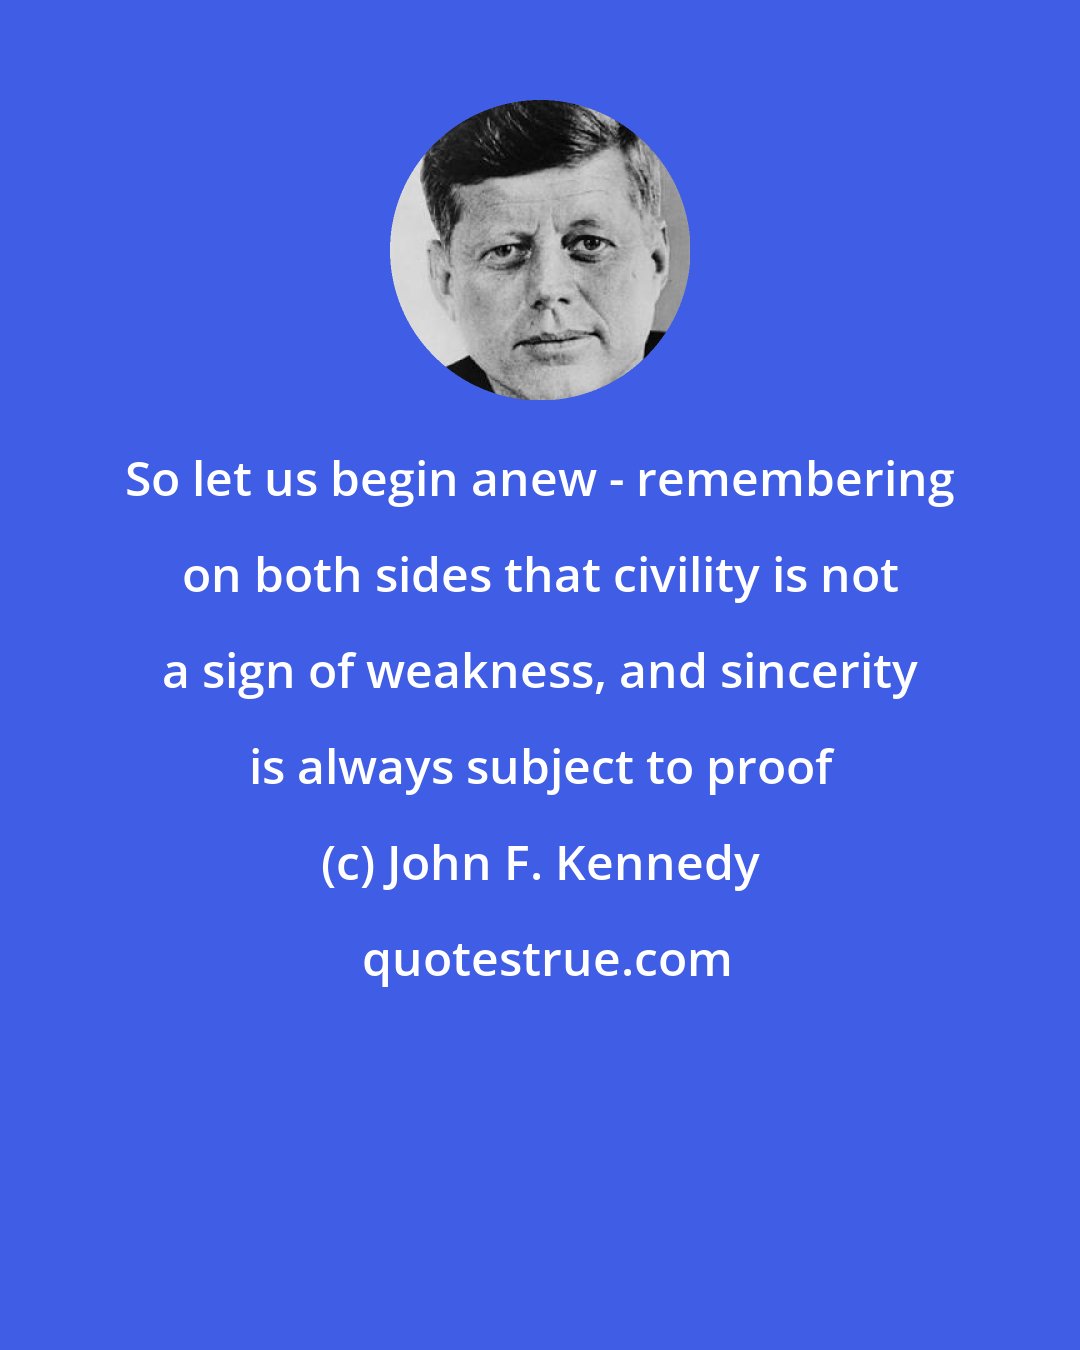 John F. Kennedy: So let us begin anew - remembering on both sides that civility is not a sign of weakness, and sincerity is always subject to proof